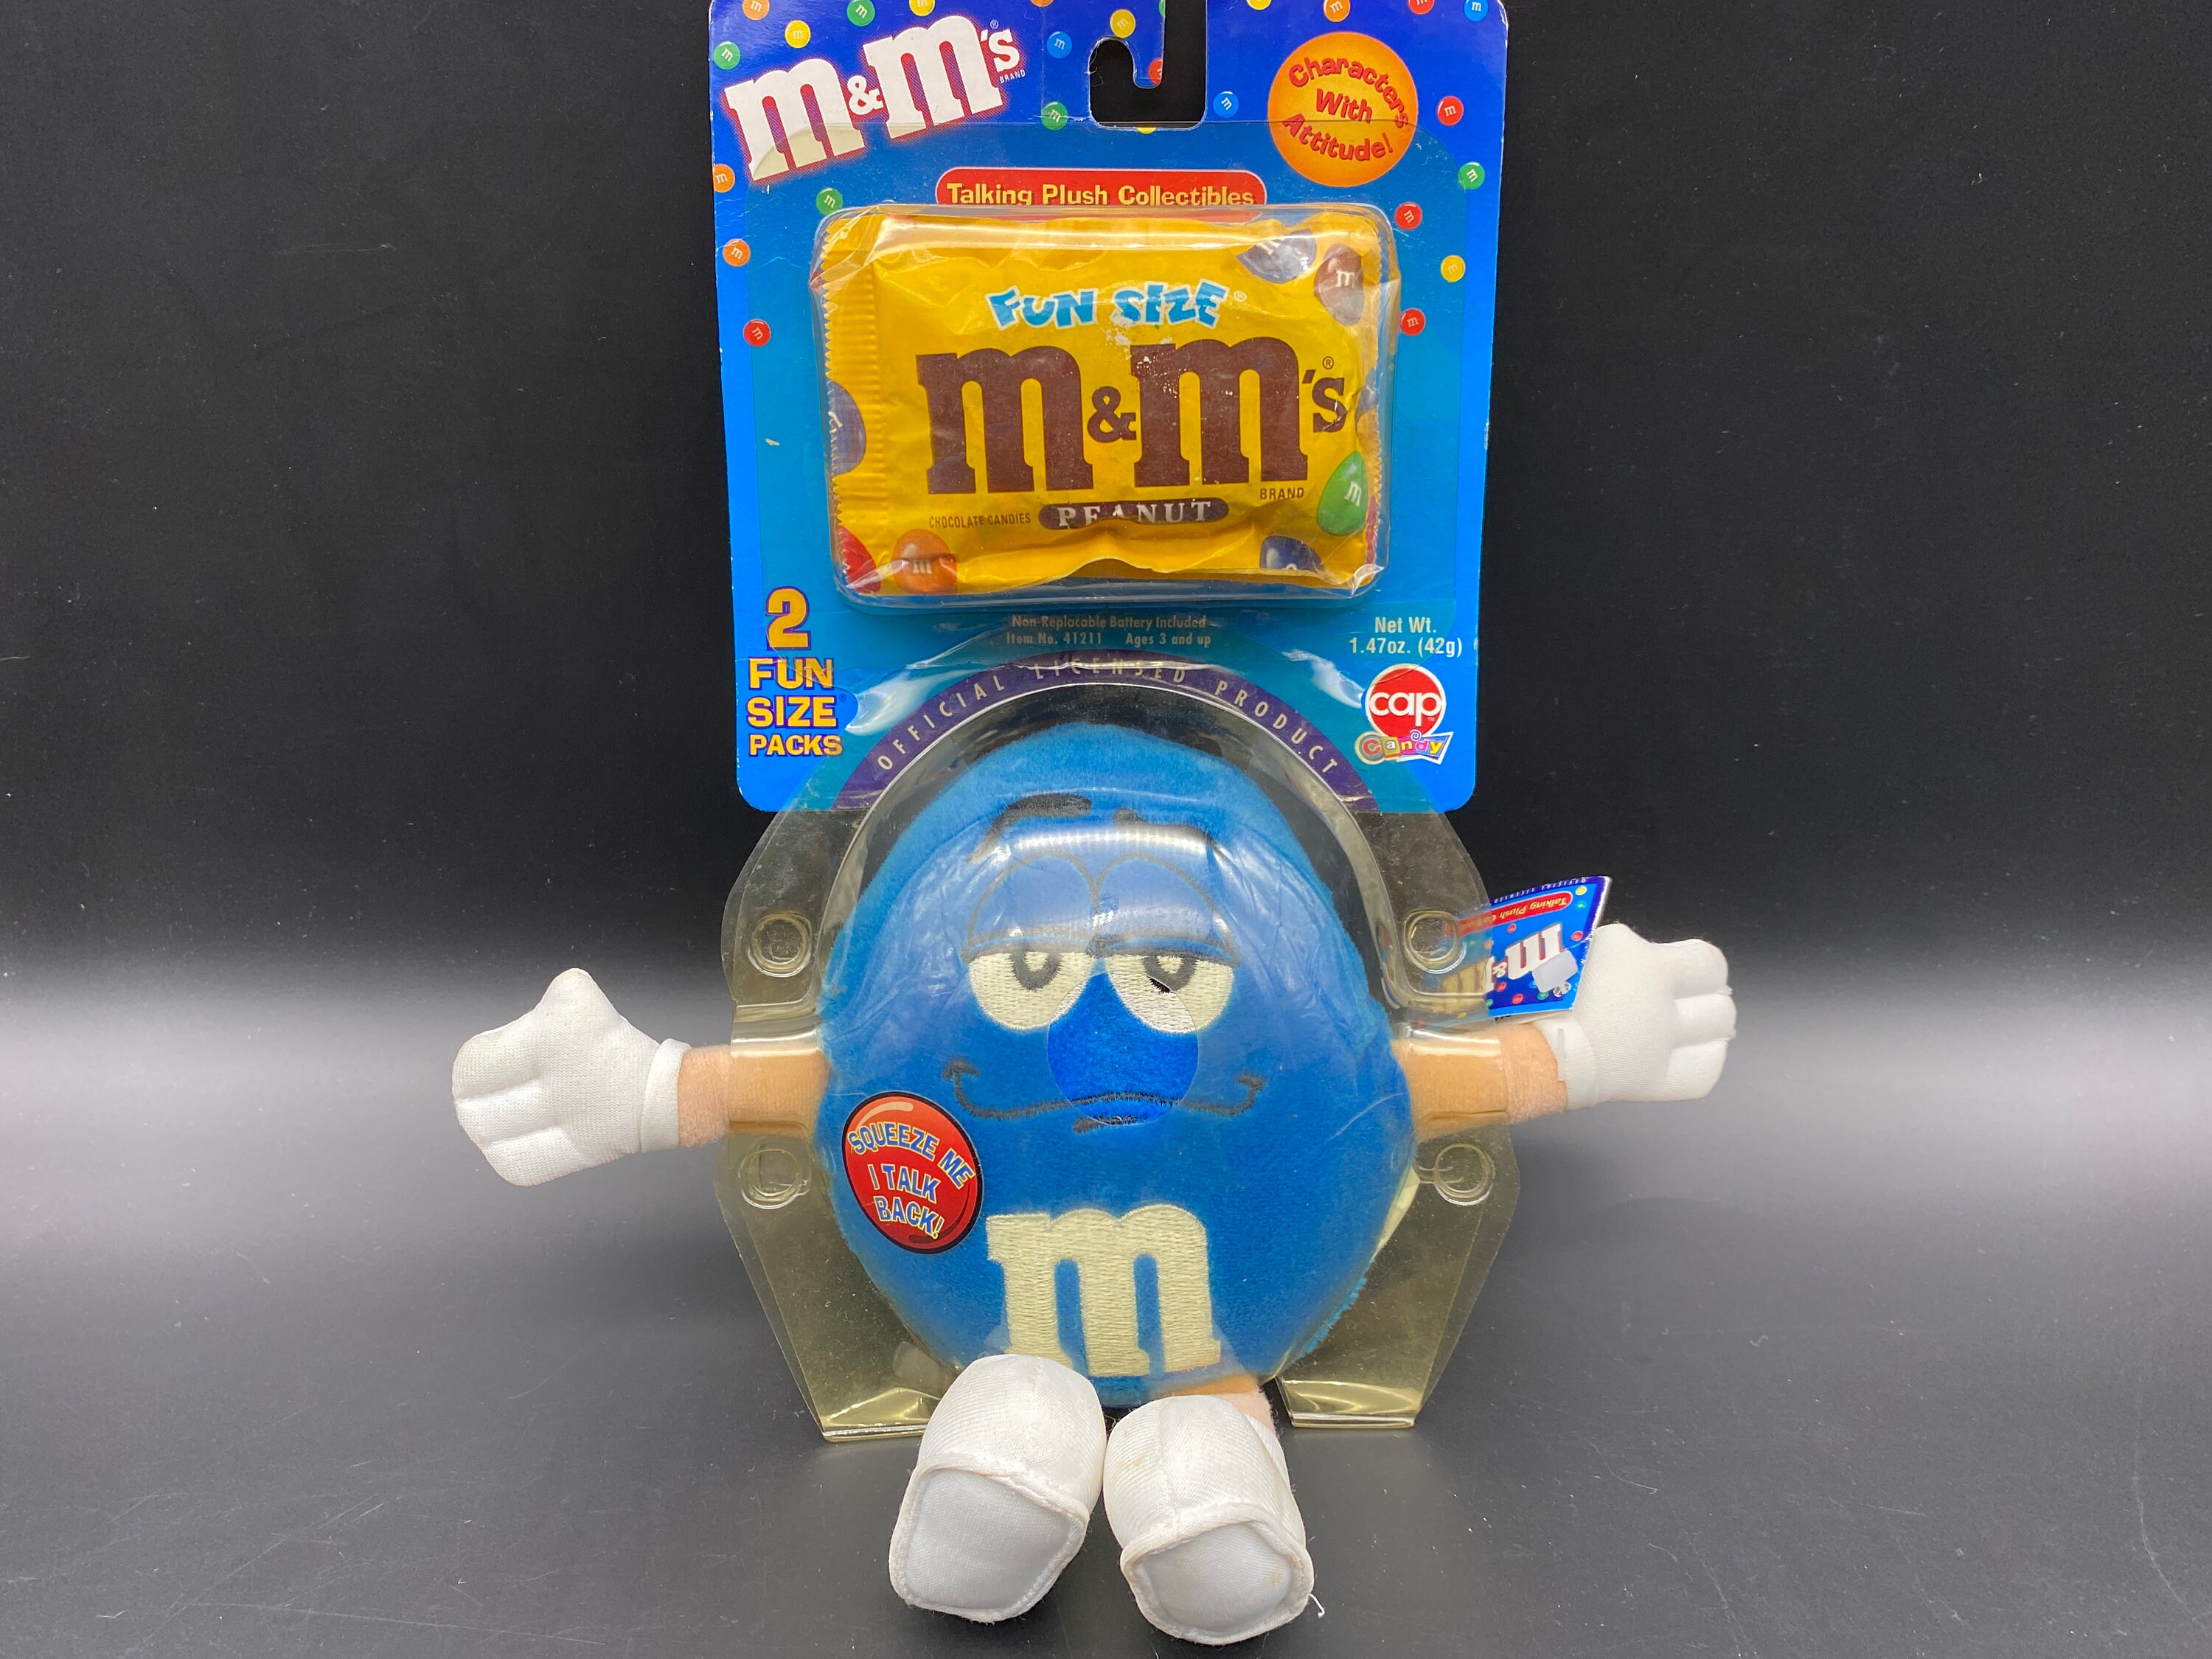 M&M's World Blue Character Recliner Candy Dispenser New with Tags